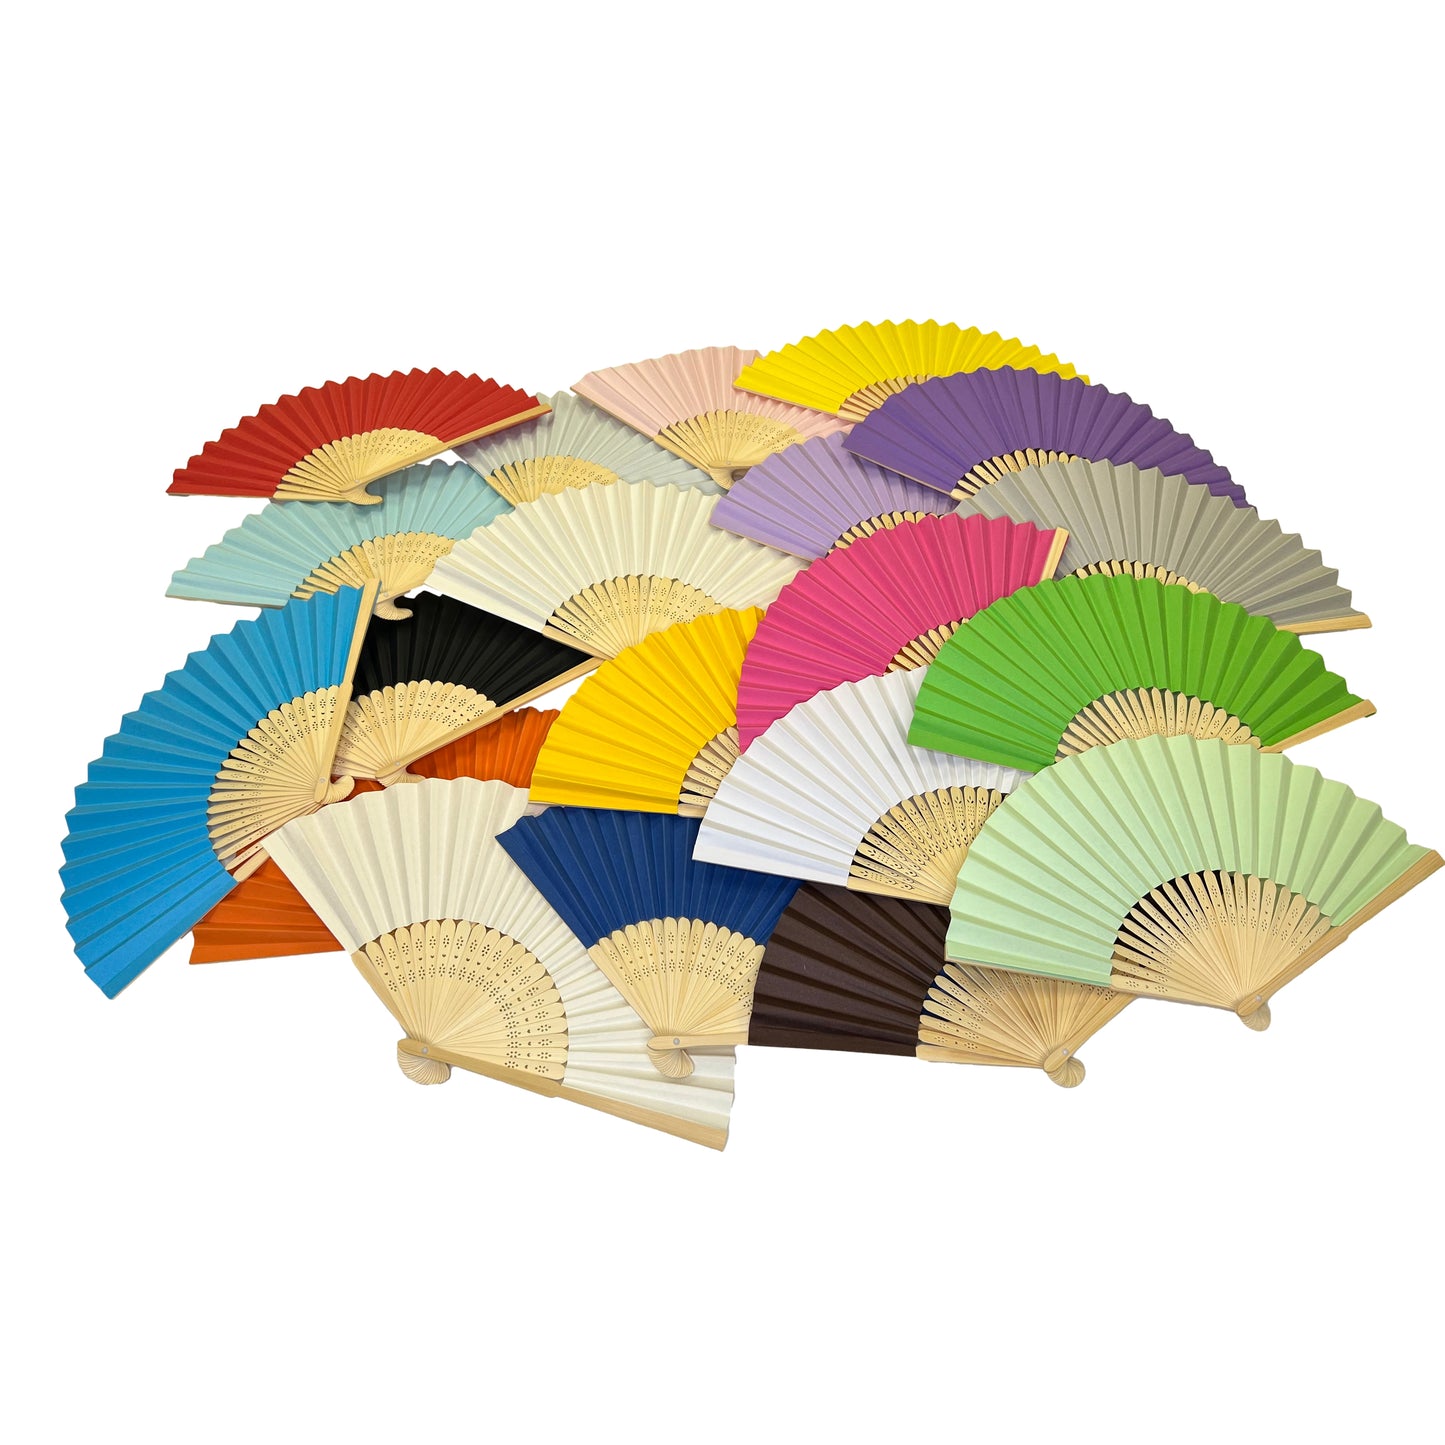 Red Paper Foldable Hand Held Bamboo Wooden Fan by Parev